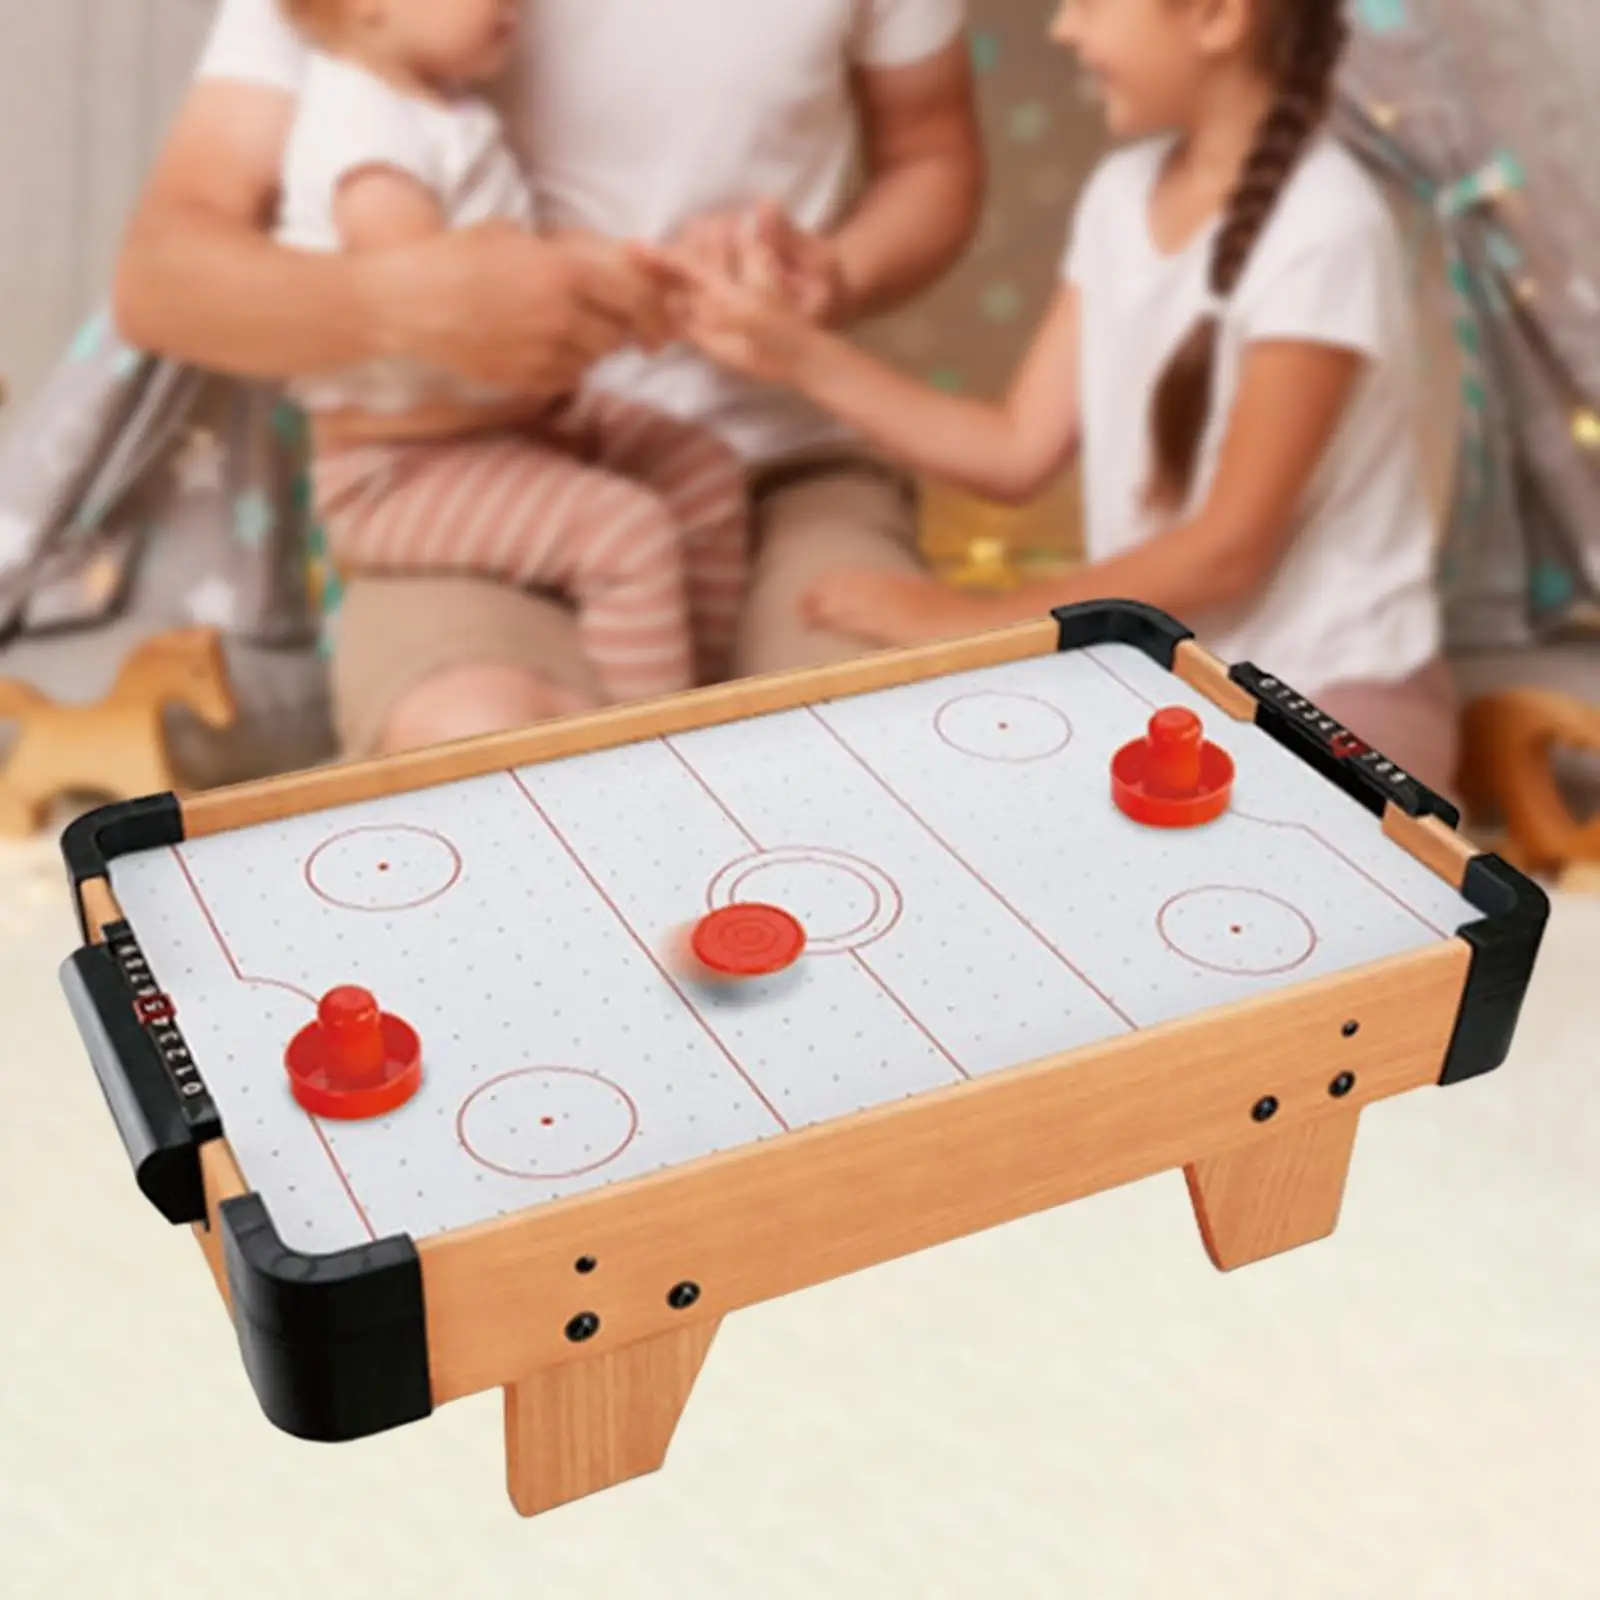 Air Hockey Table Paced Winner Board Game with Sliders and Pucks Parent Child Interactive Desktop Playing Field for Children Kids